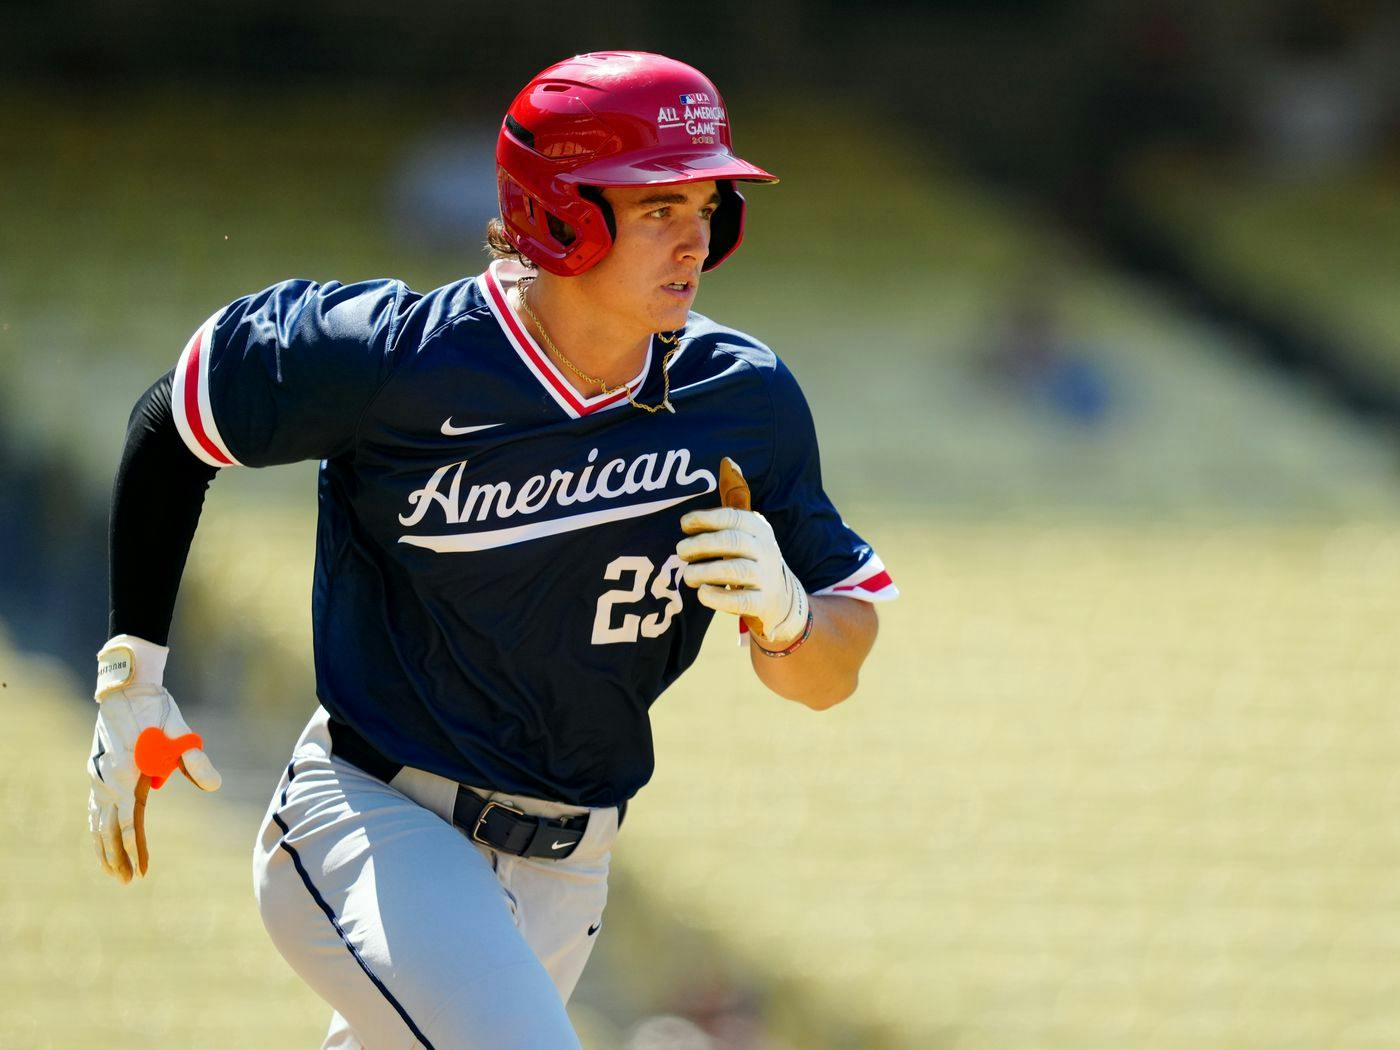 2023 MLB Draft Primer: Who The Rangers Could Target With The 4th